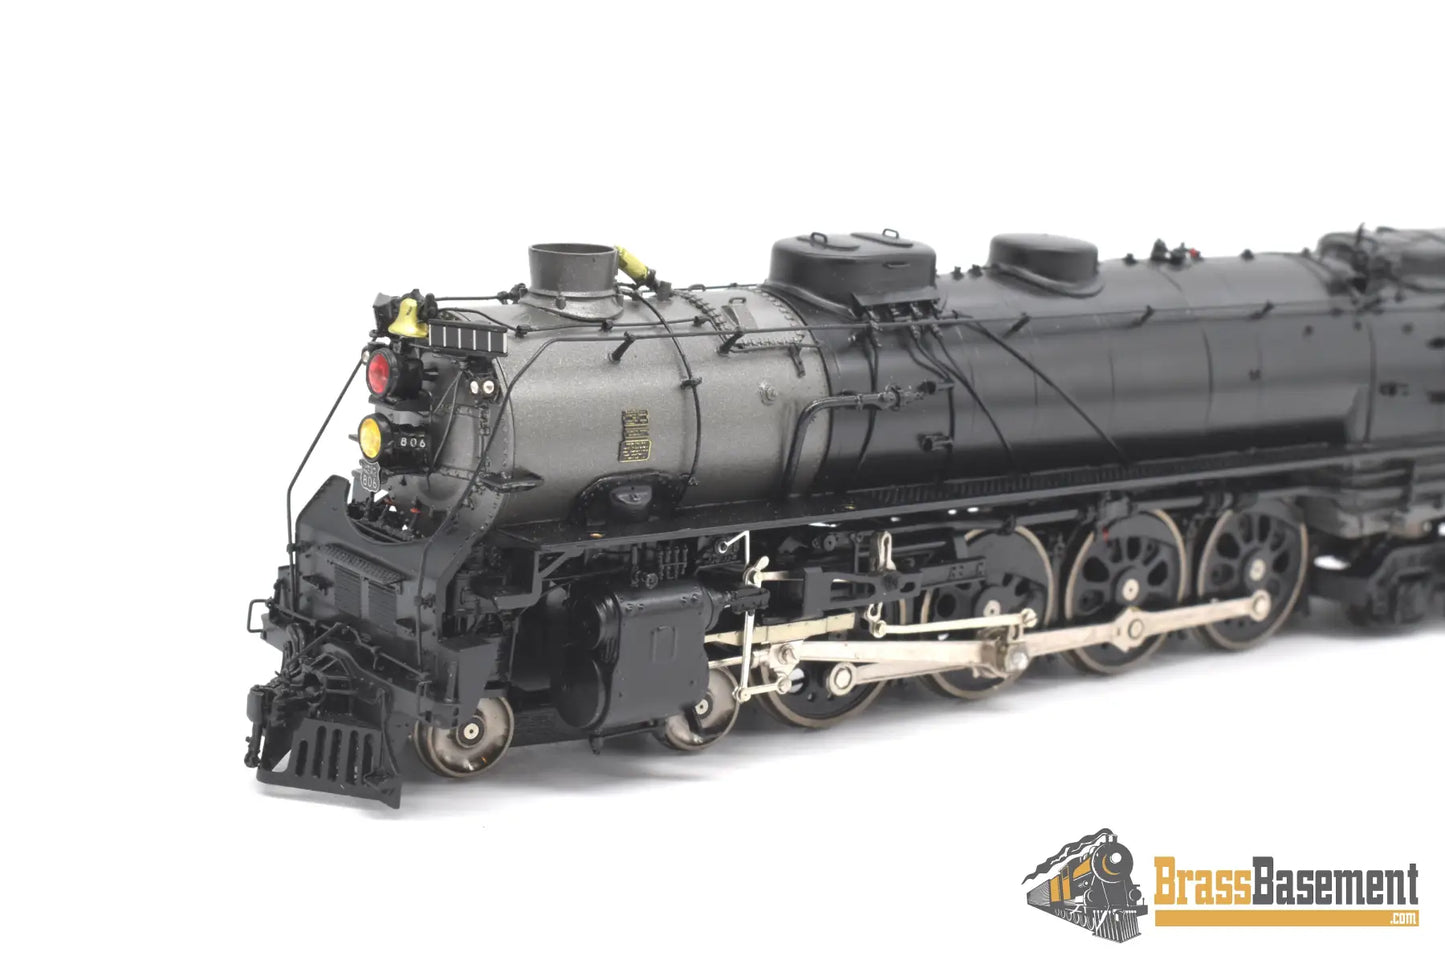 Ho Brass - Overland Omi 4533.1 Union Pacific Up Fef - 1 #806 Black F/P Steam